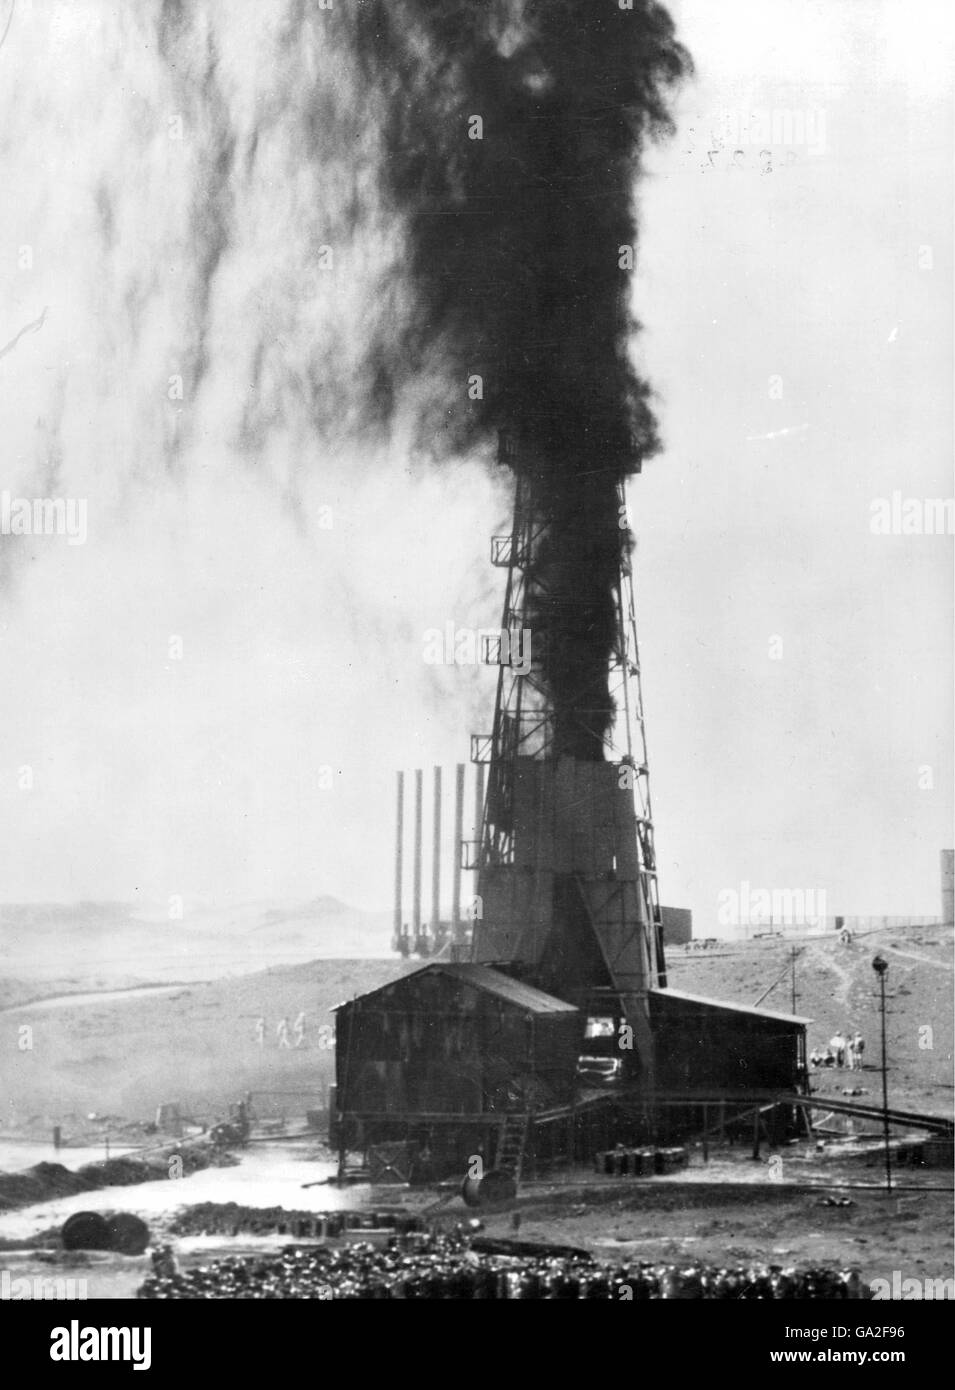 Day of destiny in Iraq - Uncontrollable fountain of oil gushes 140 feet above the deck of No 1 well at Baba Gurgur , Kirkuk - Persia 1927 Stock Photo